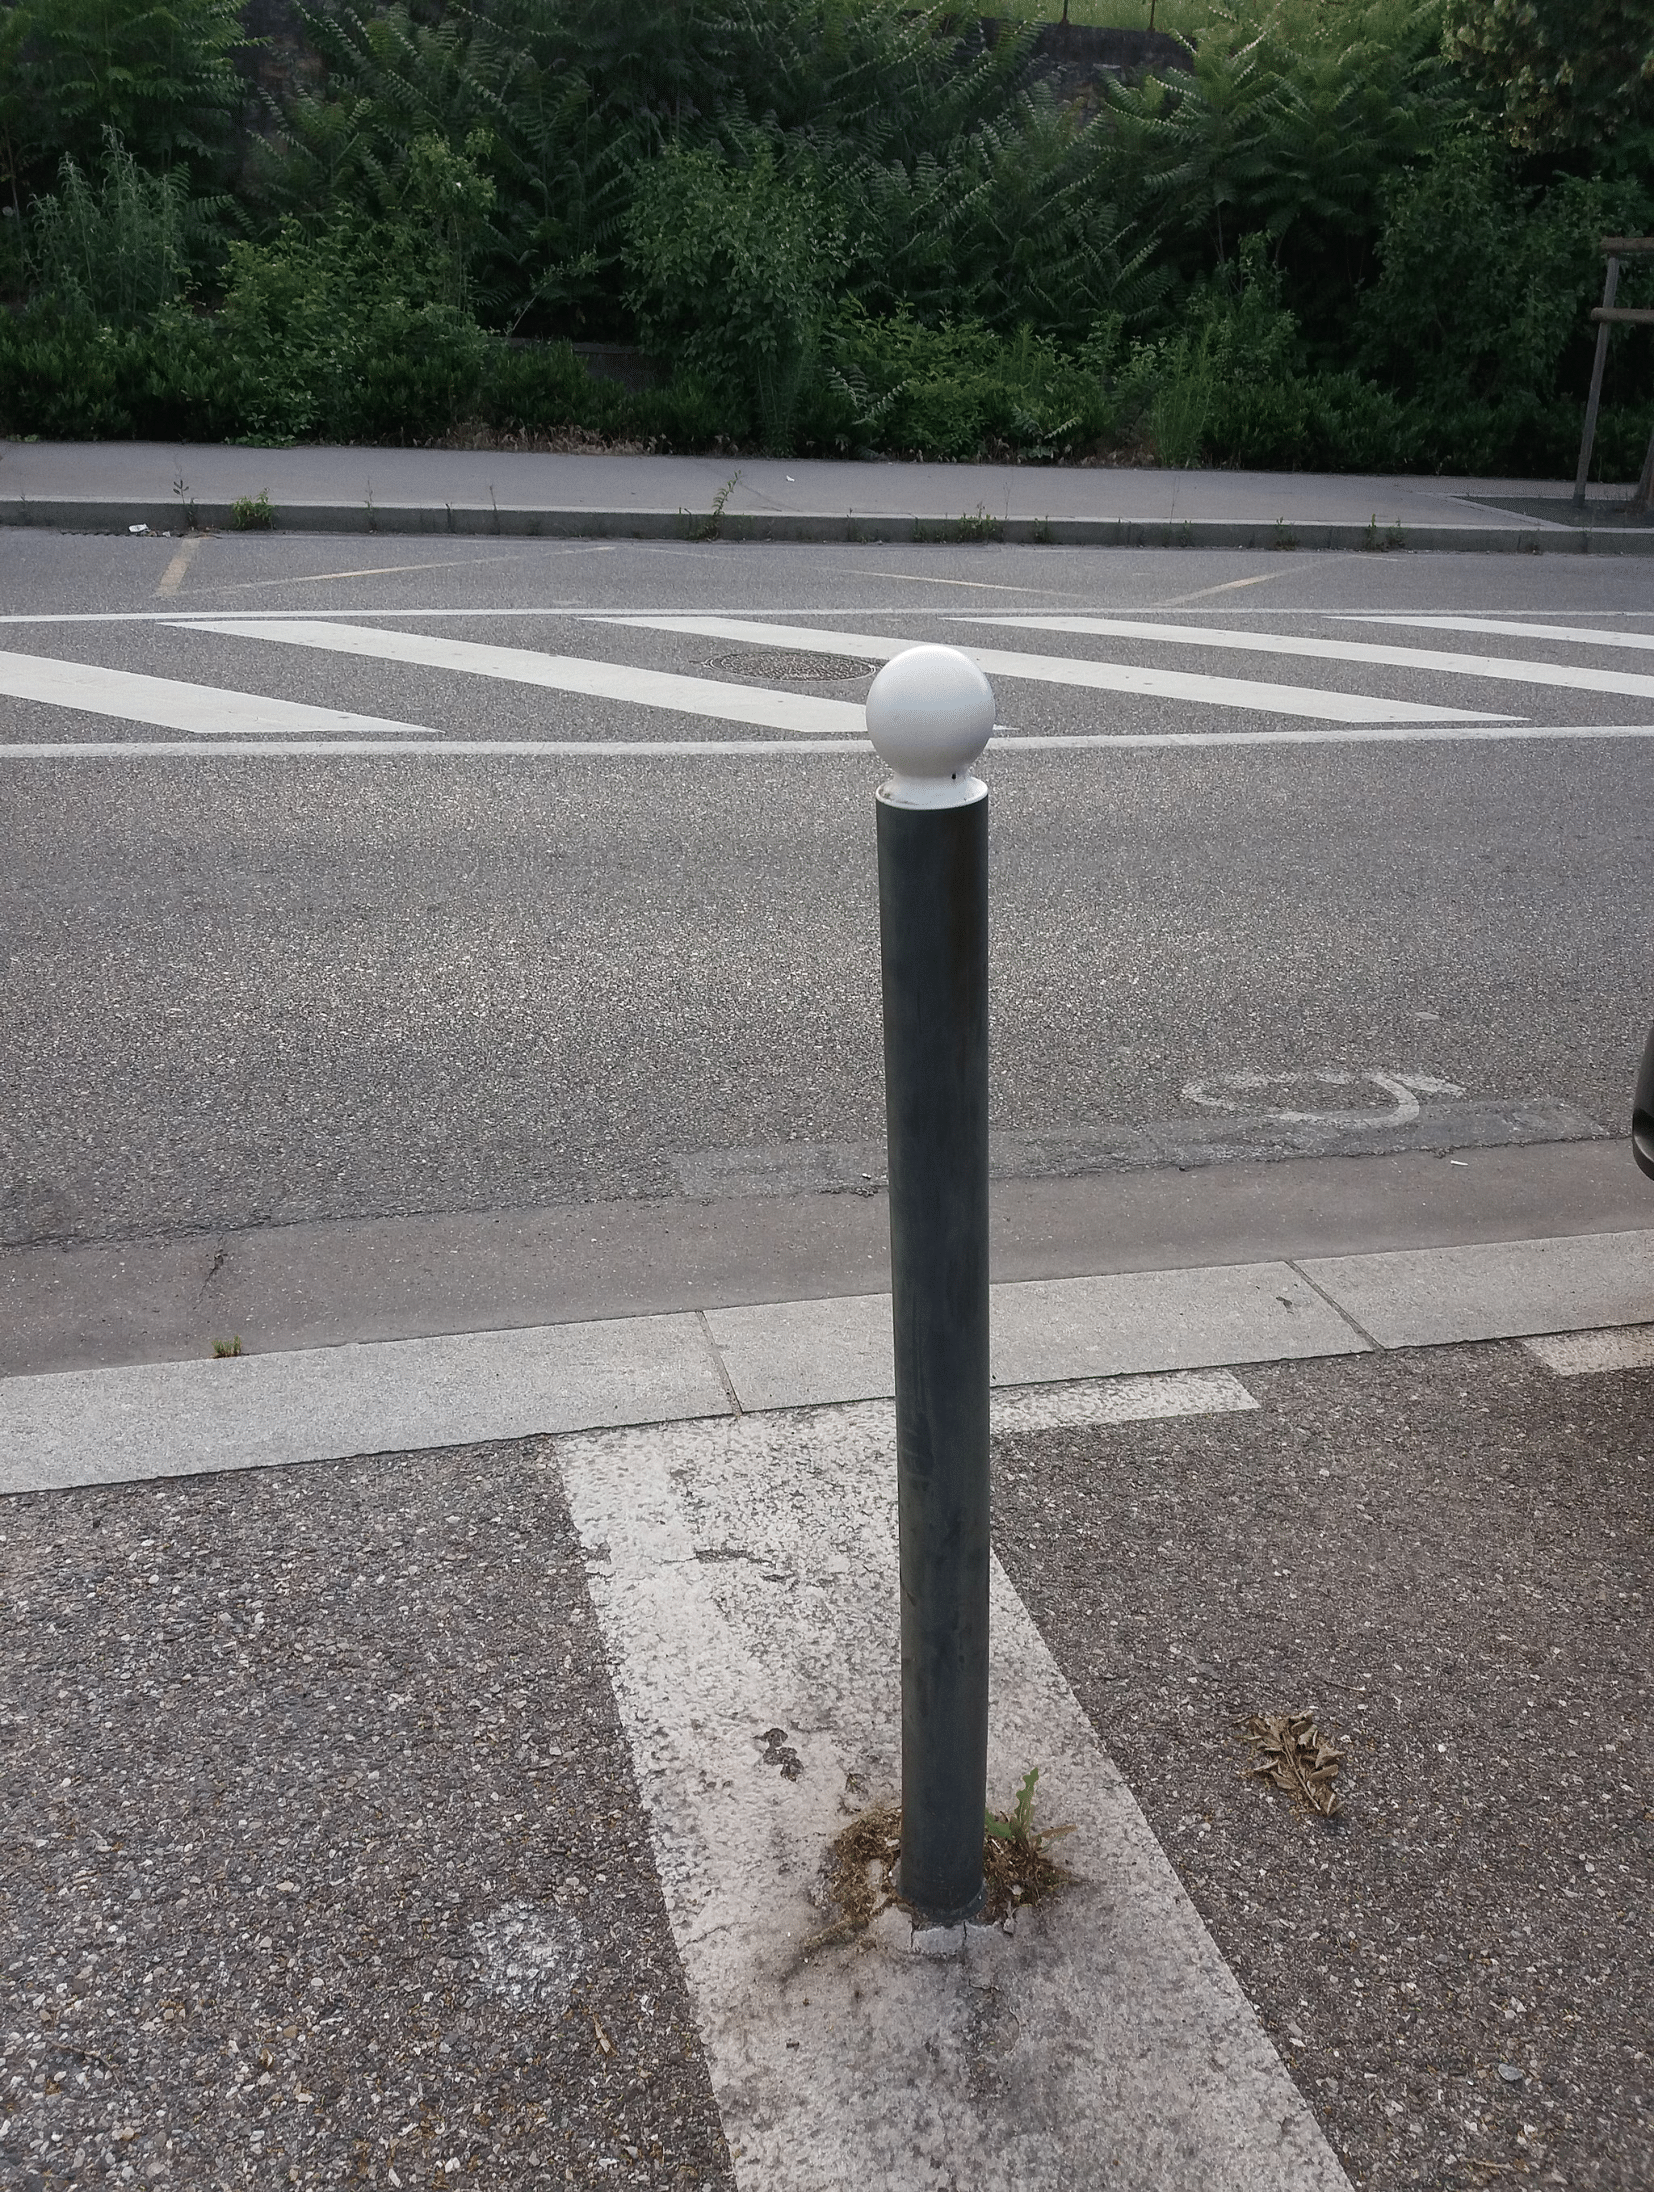 A picture of a street post